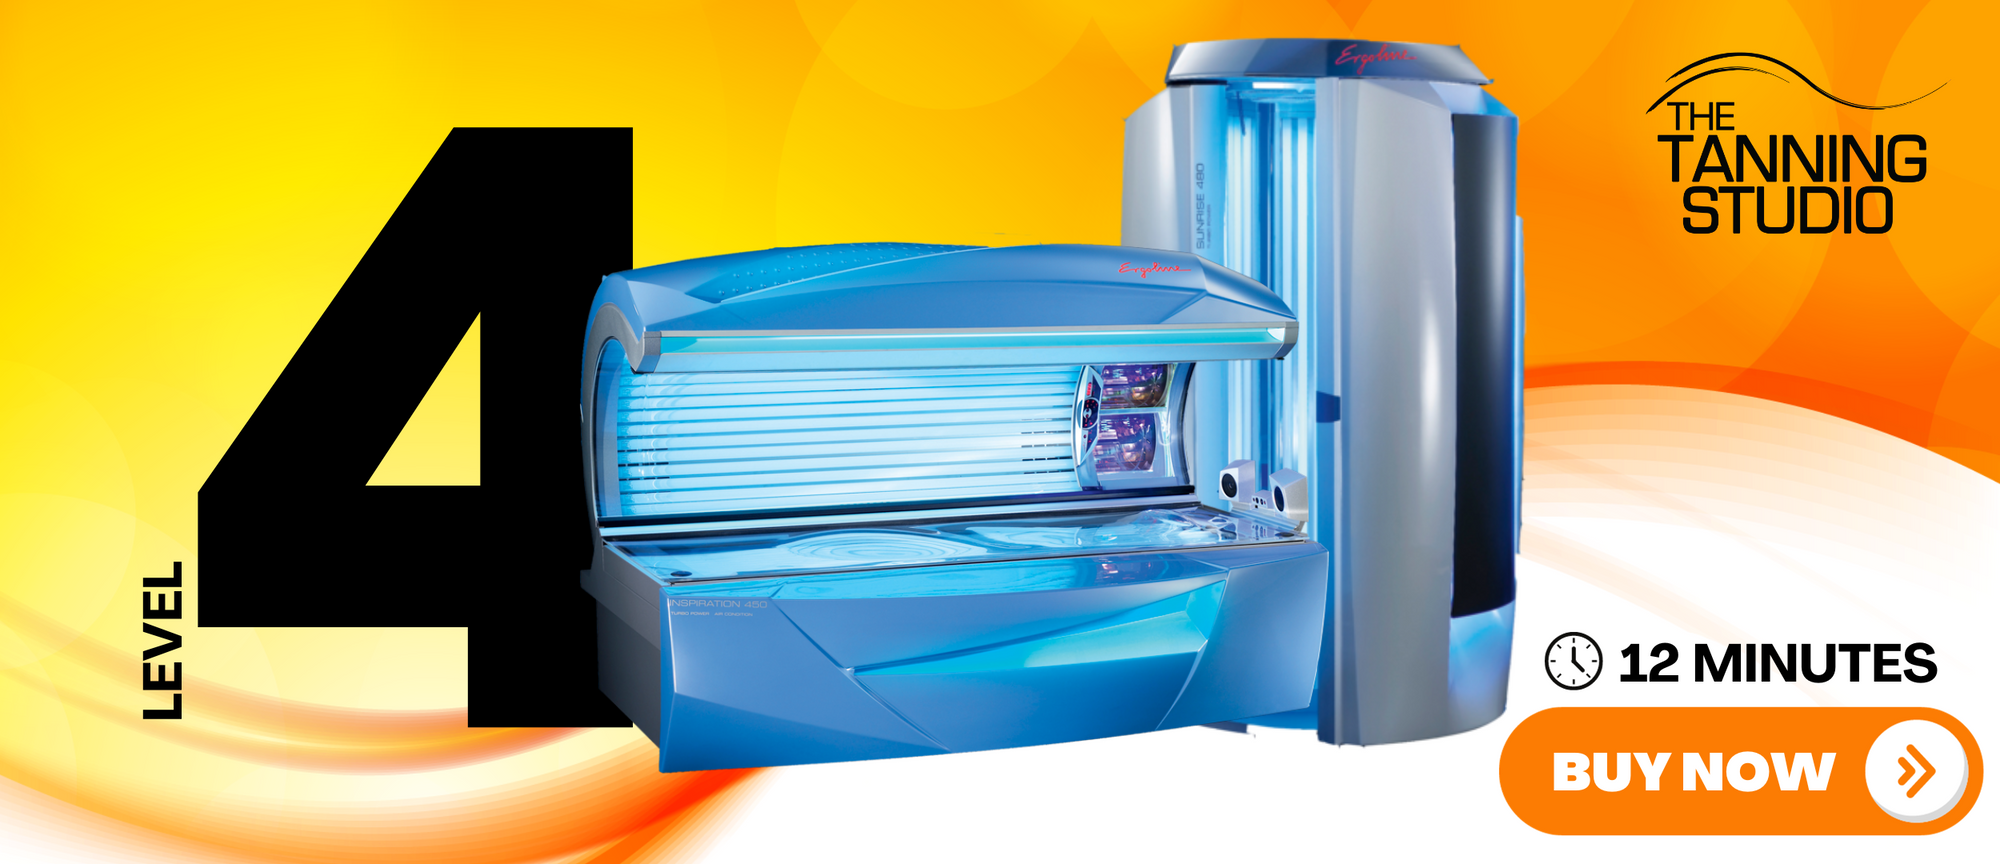 Level 4 Tanning Bed. 12 Minute Tan Time